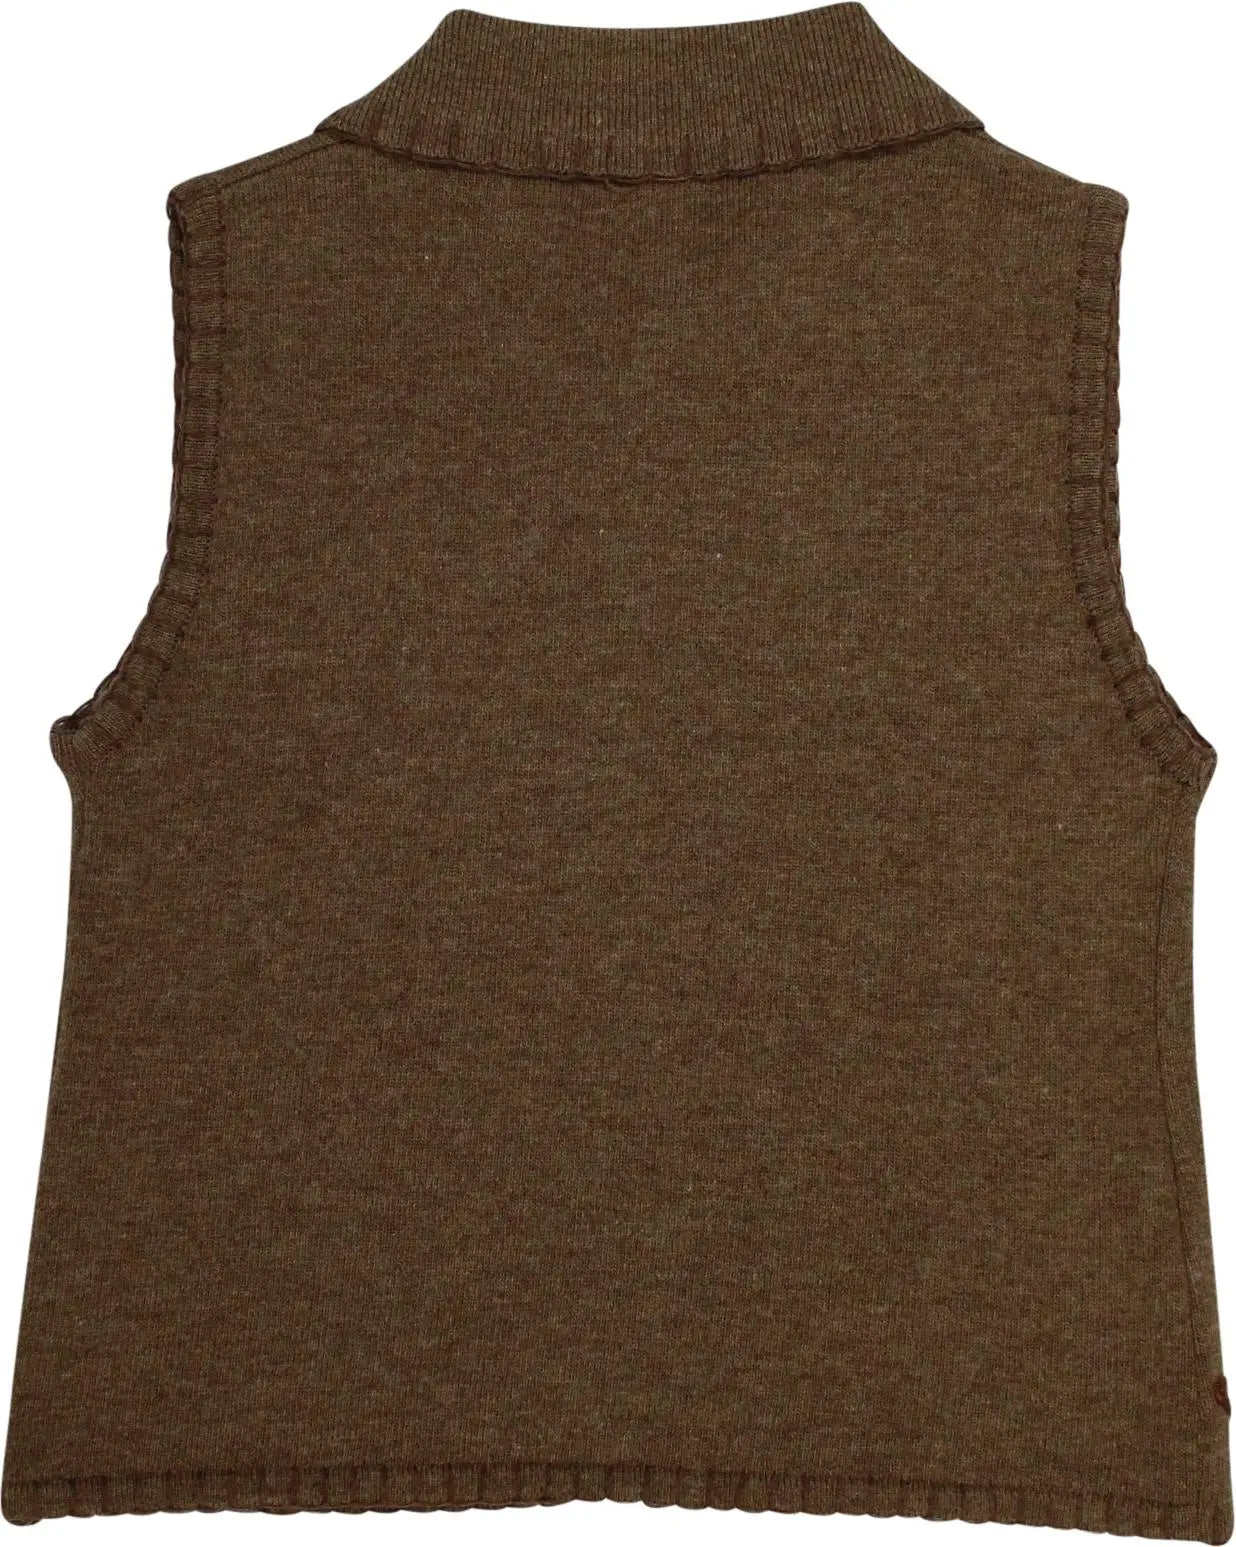 Woolrich - Brown Sleeveless Vest by Woolrich- ThriftTale.com - Vintage and second handclothing